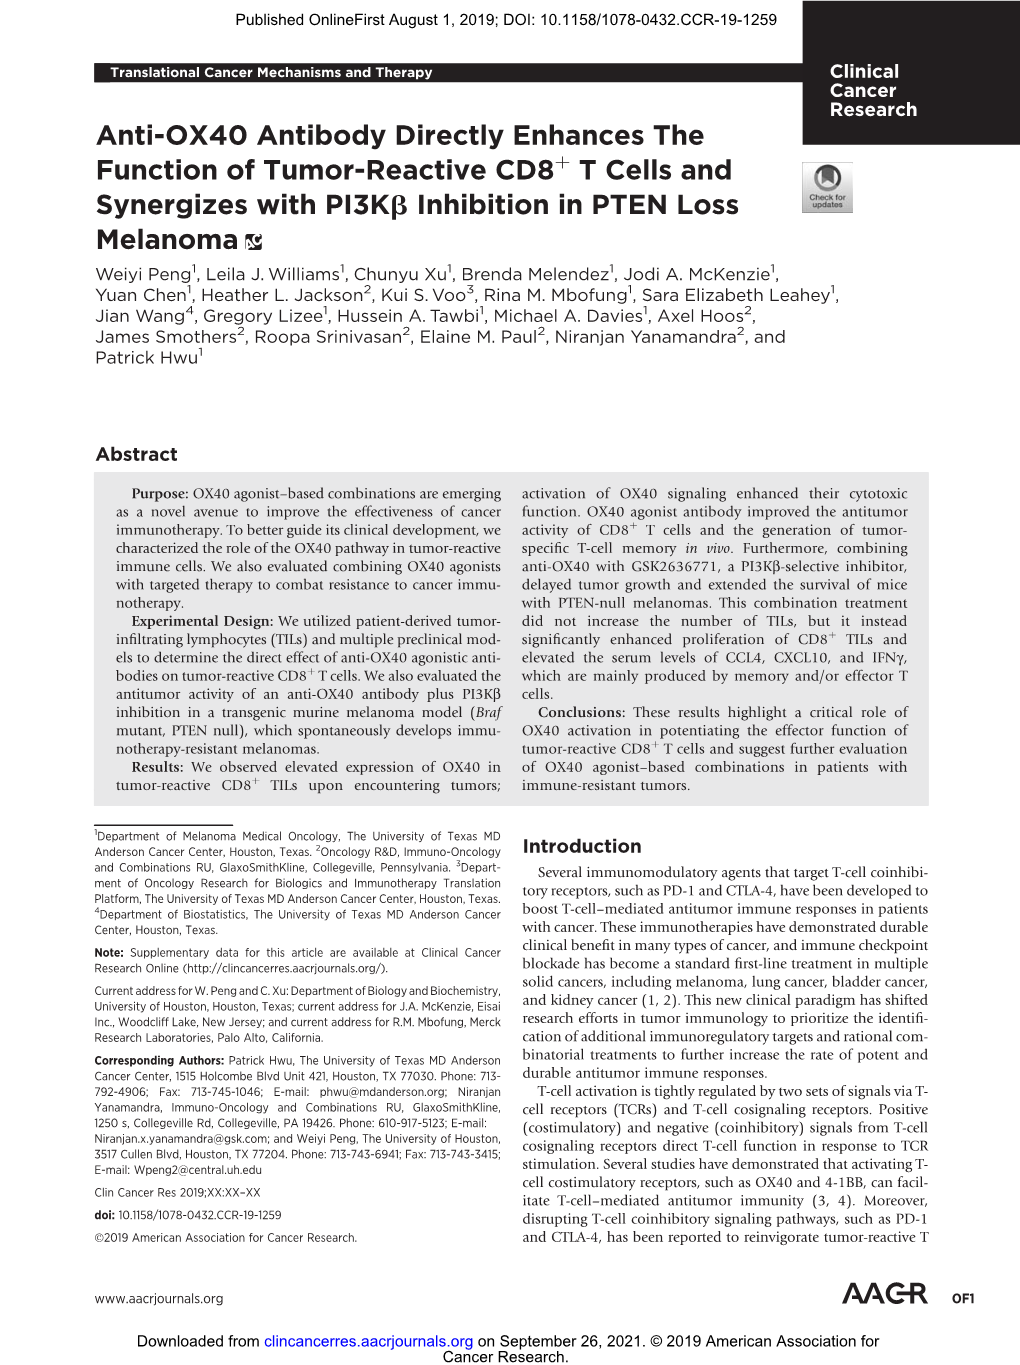 Anti-OX40 Antibody Directly Enhances the Function of Tumor-Reactive Cd8þ T Cells and Synergizes with Pi3kb Inhibition in PTEN Loss Melanoma Weiyi Peng1, Leila J